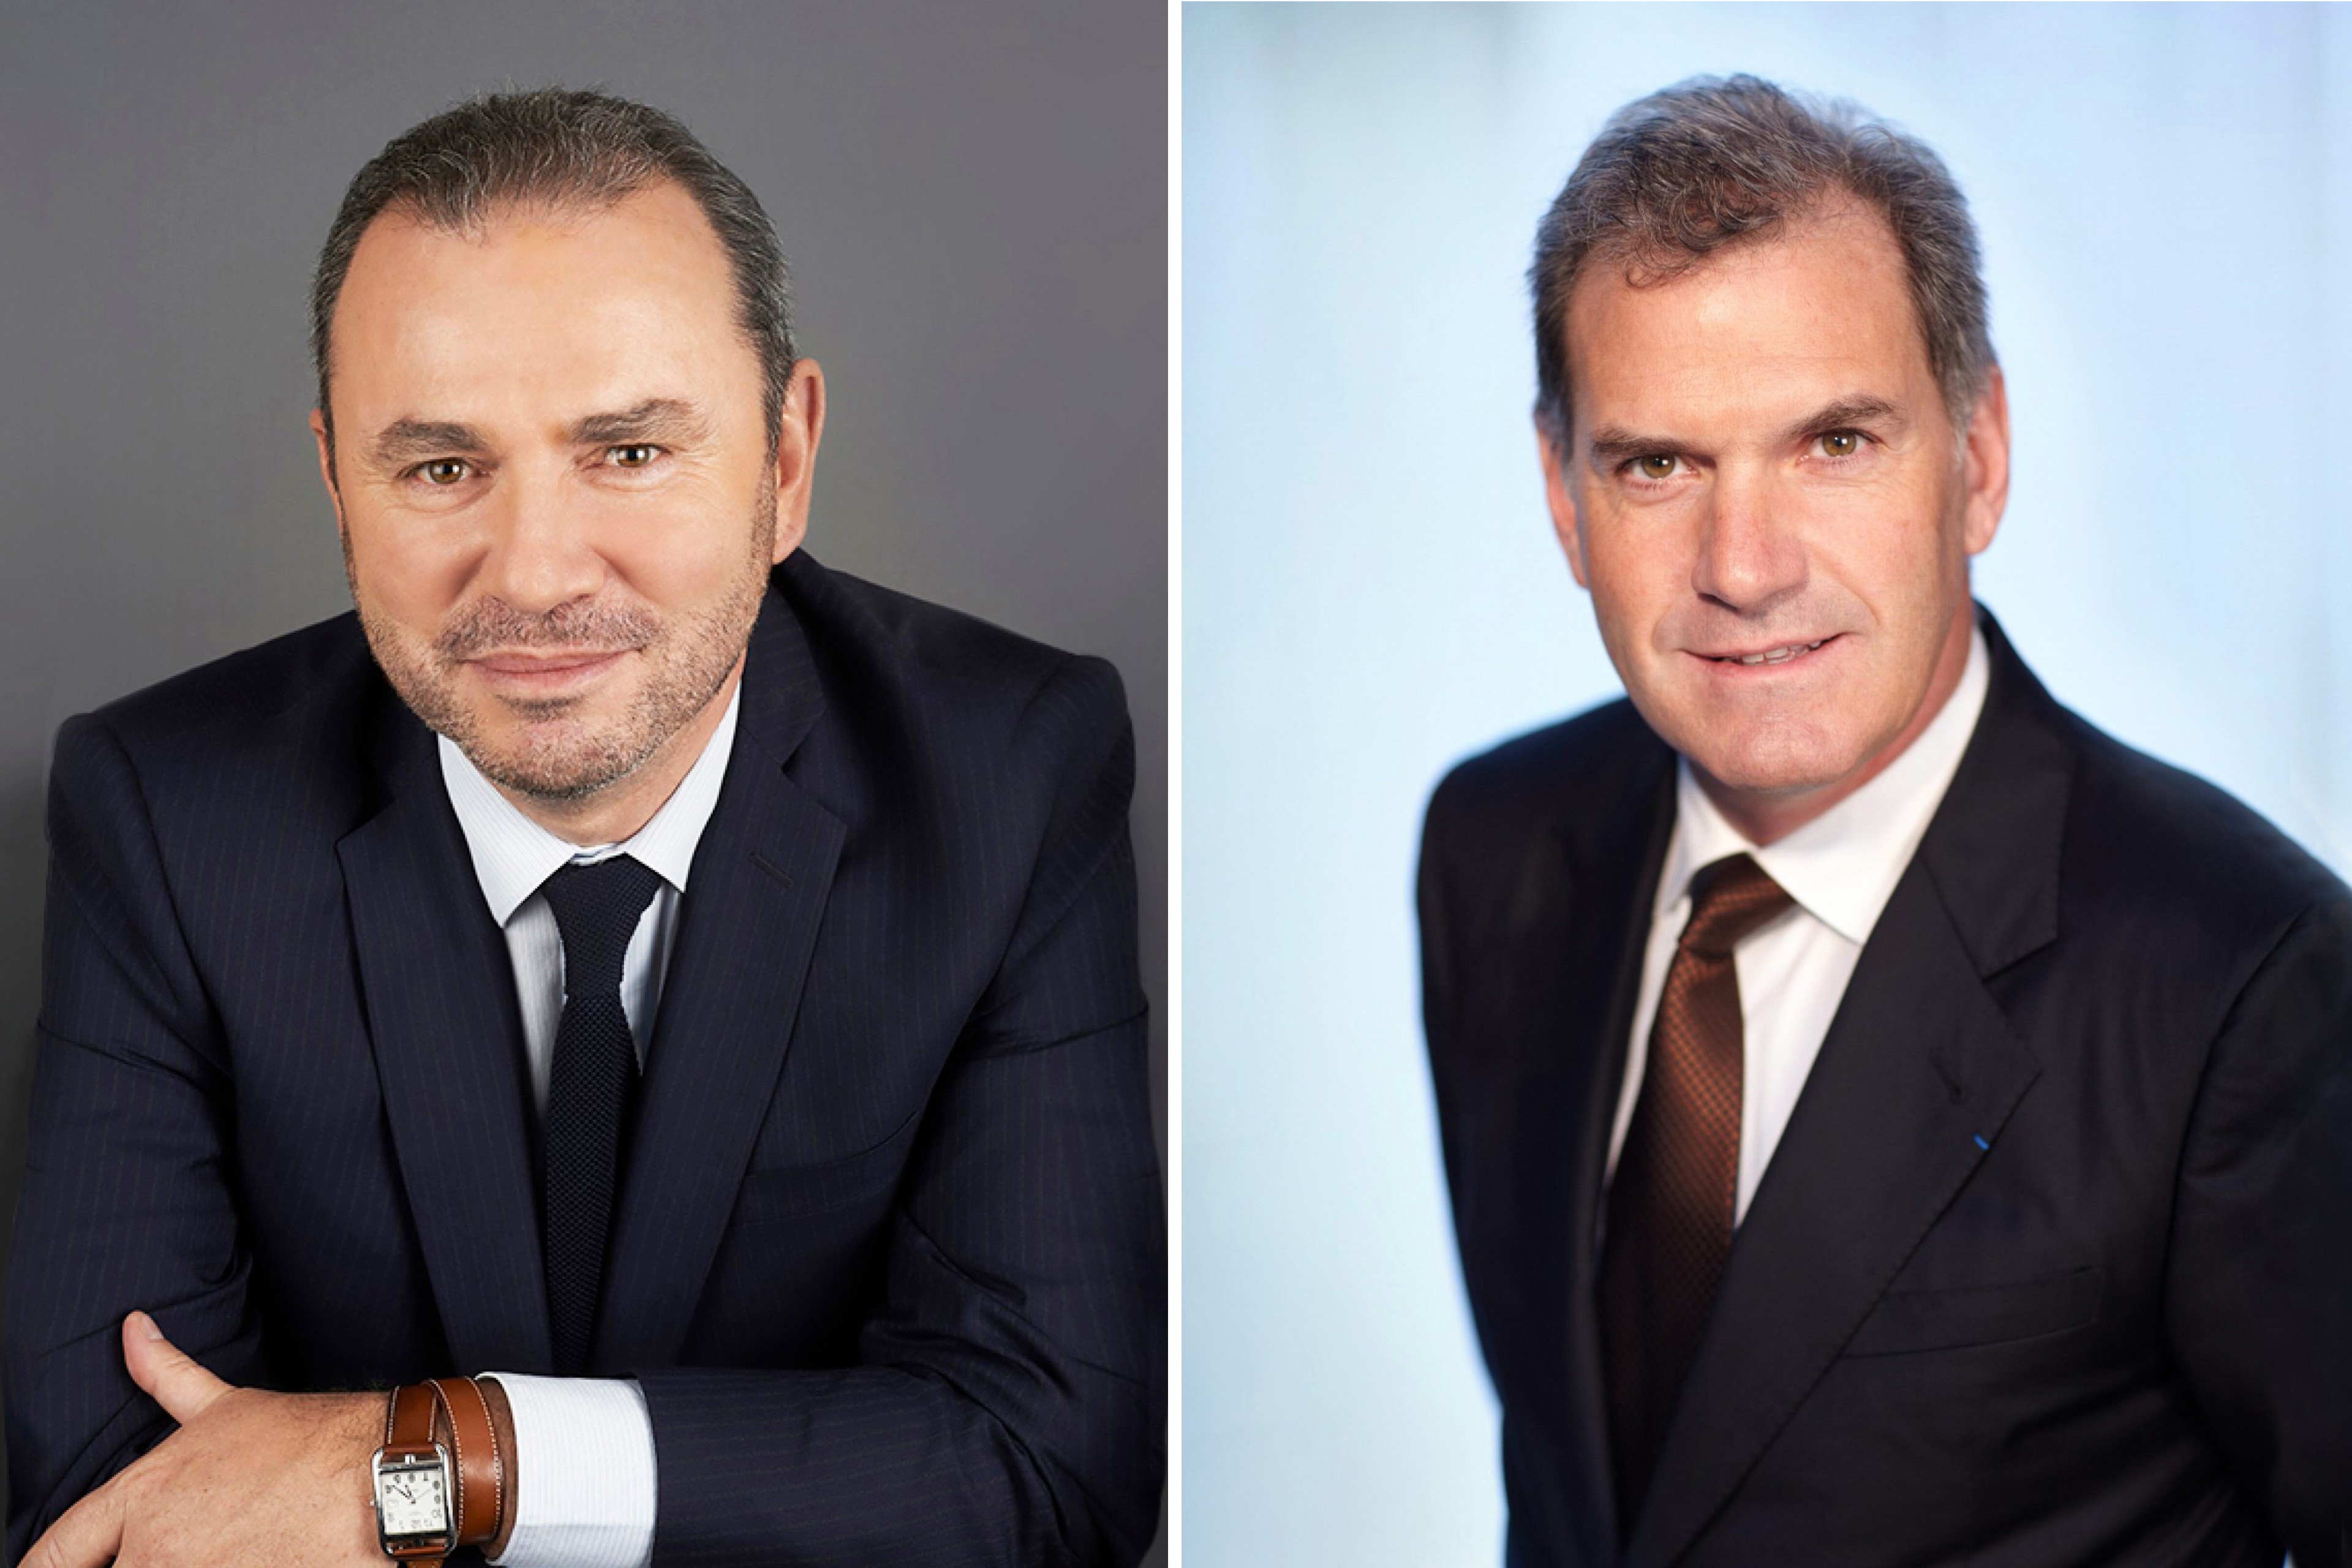 Pascal Cagni, France Ambassador for International Investments and Christophe Lecourtier, Chief Executive Officer, Business France